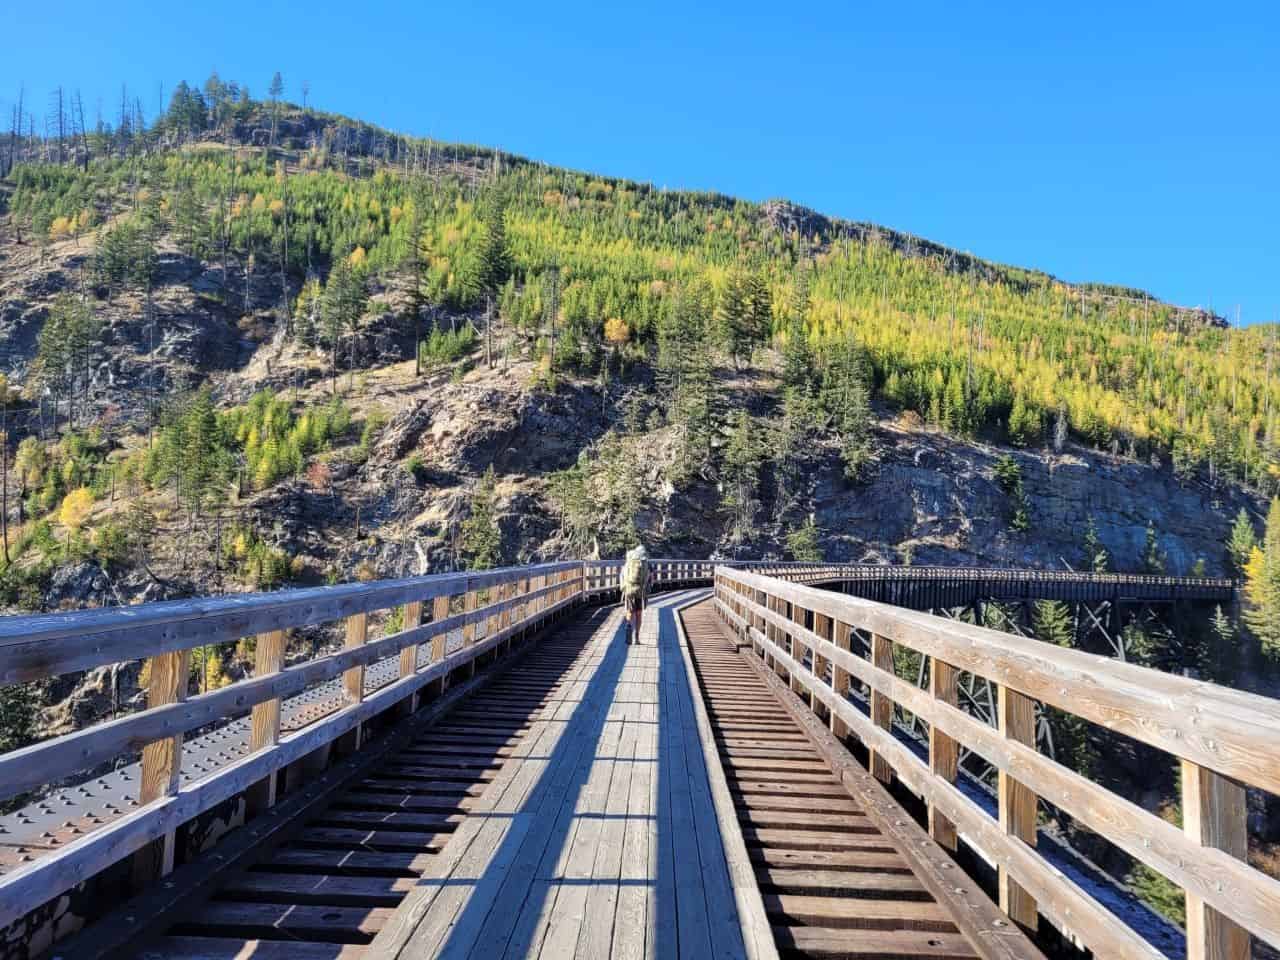 The Myra Canyon Trestles are one of the most scenic and exciting portions of British Columbia's famous #kettlevalleyrailtrail (KVR).